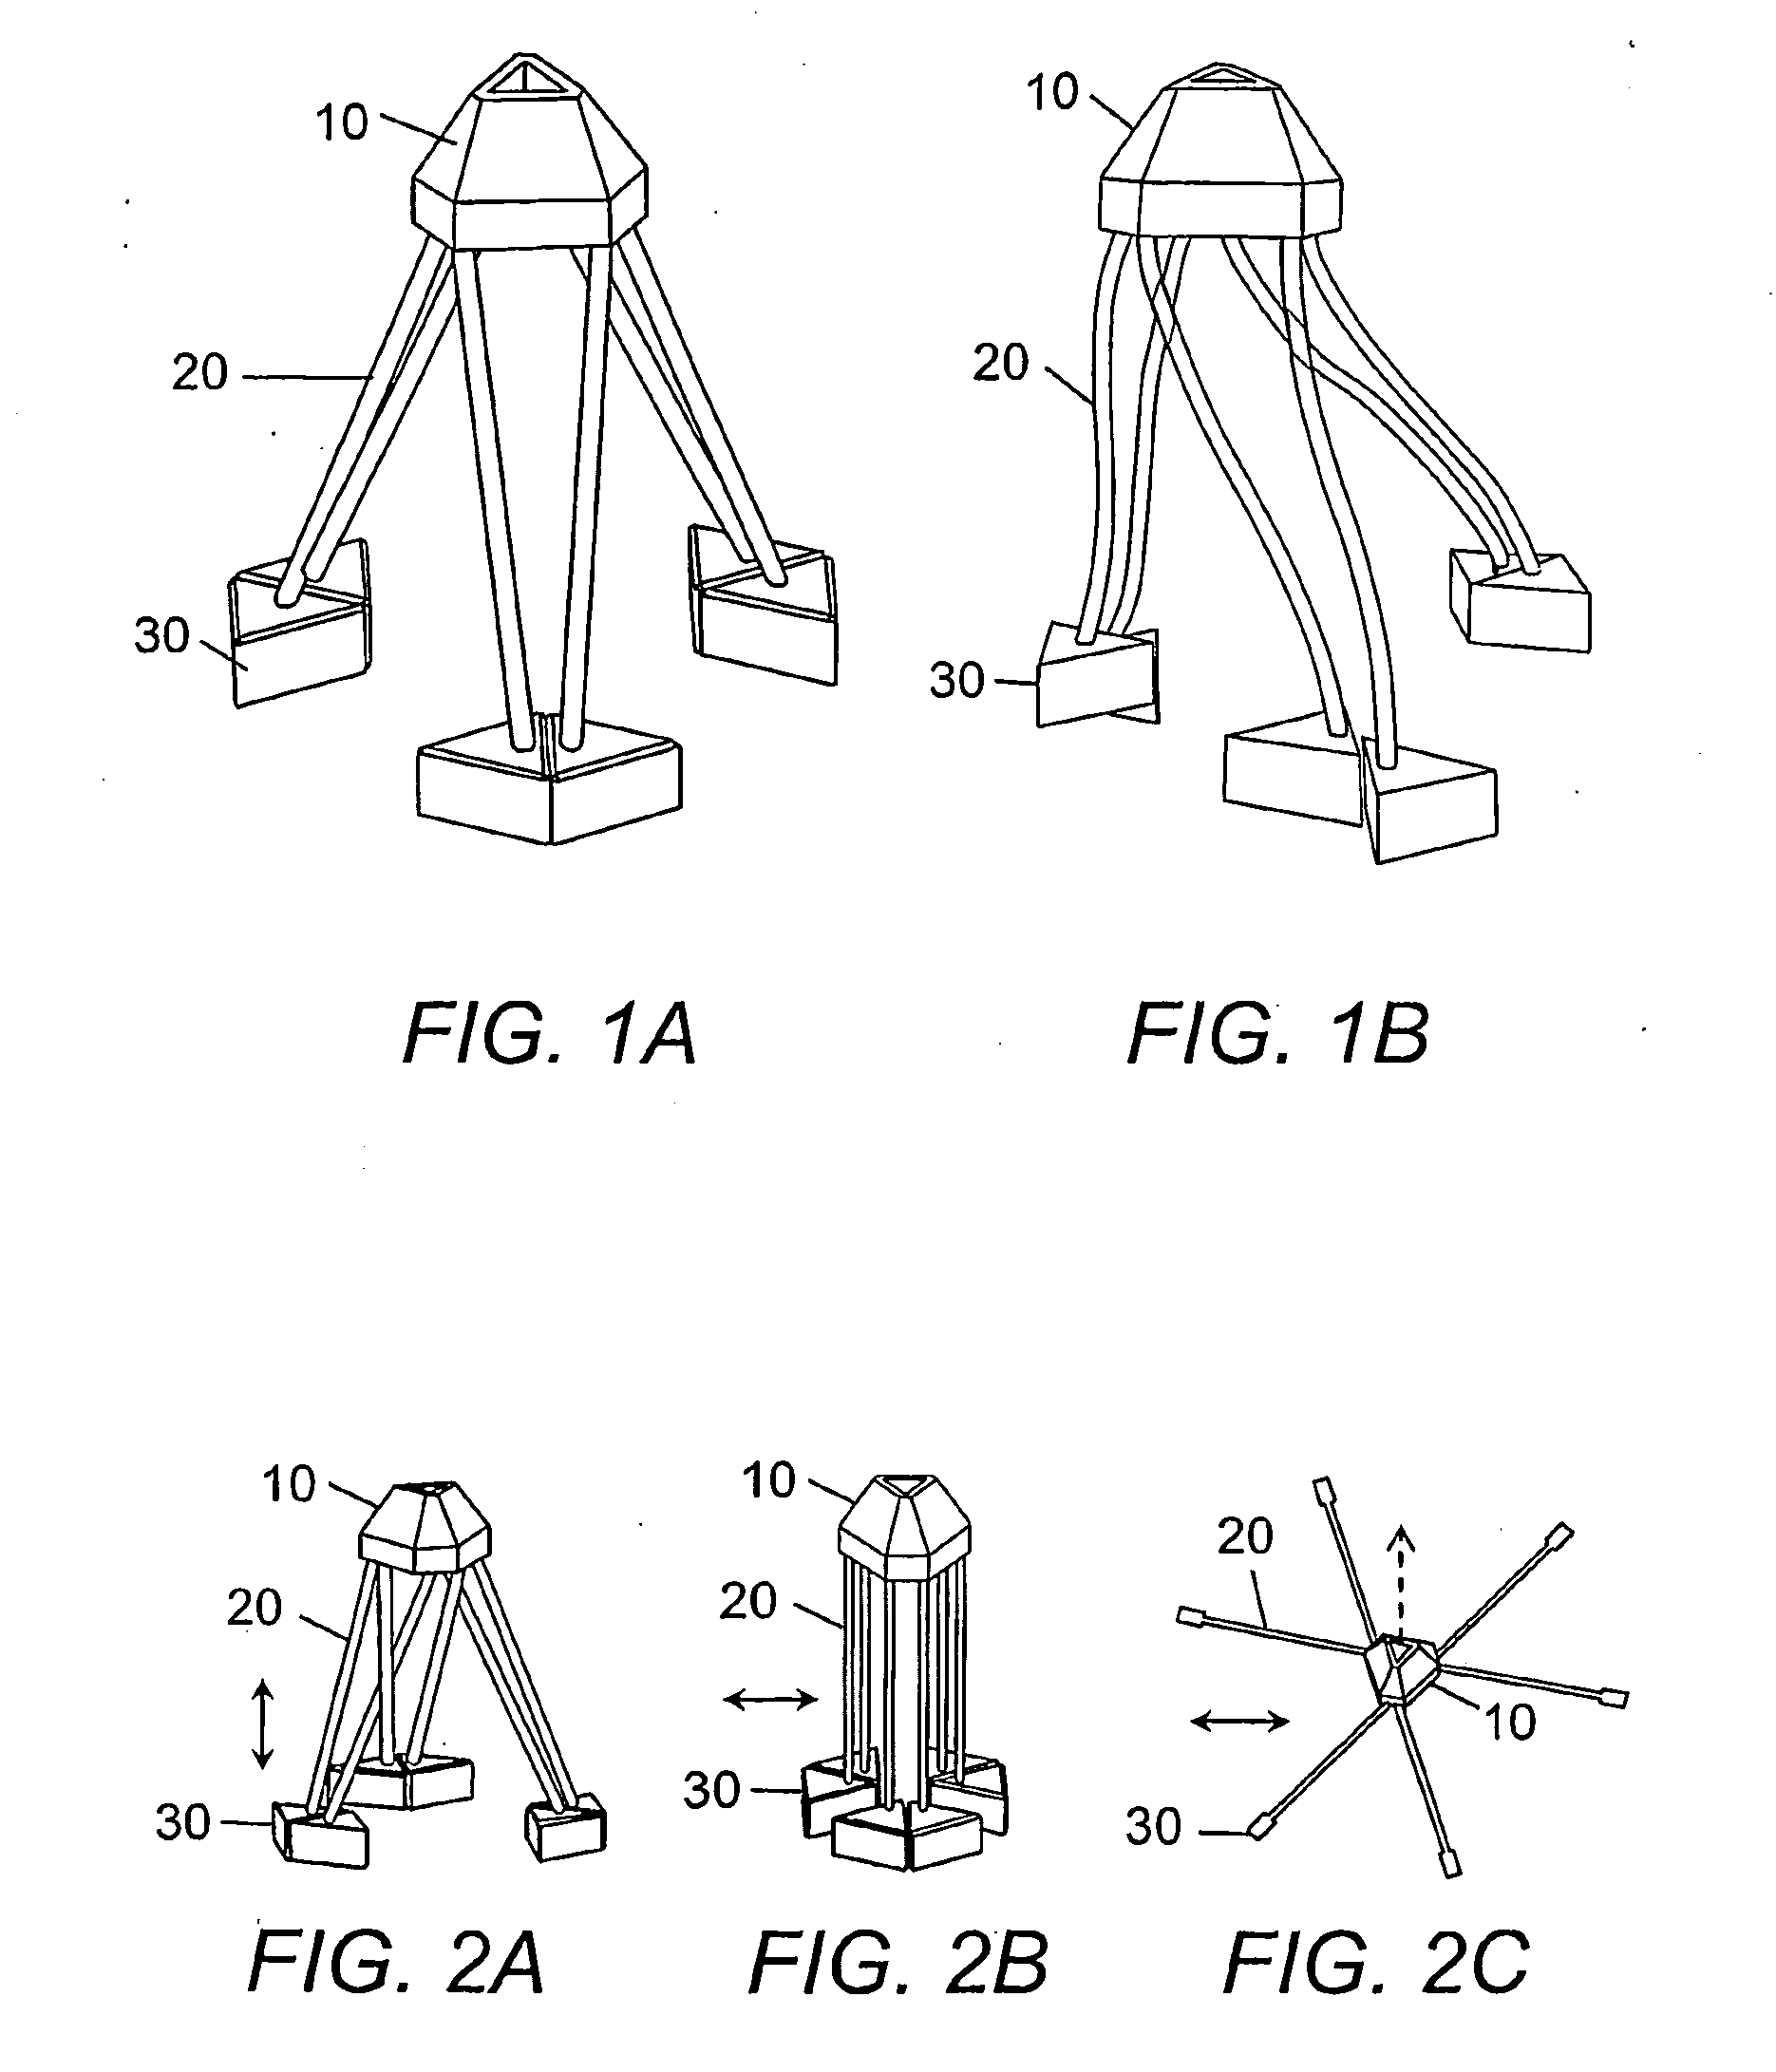 Flexible Parallel Manipulator For Nano-, Meso- or Macro-Positioning With Multi-Degrees of Freedom